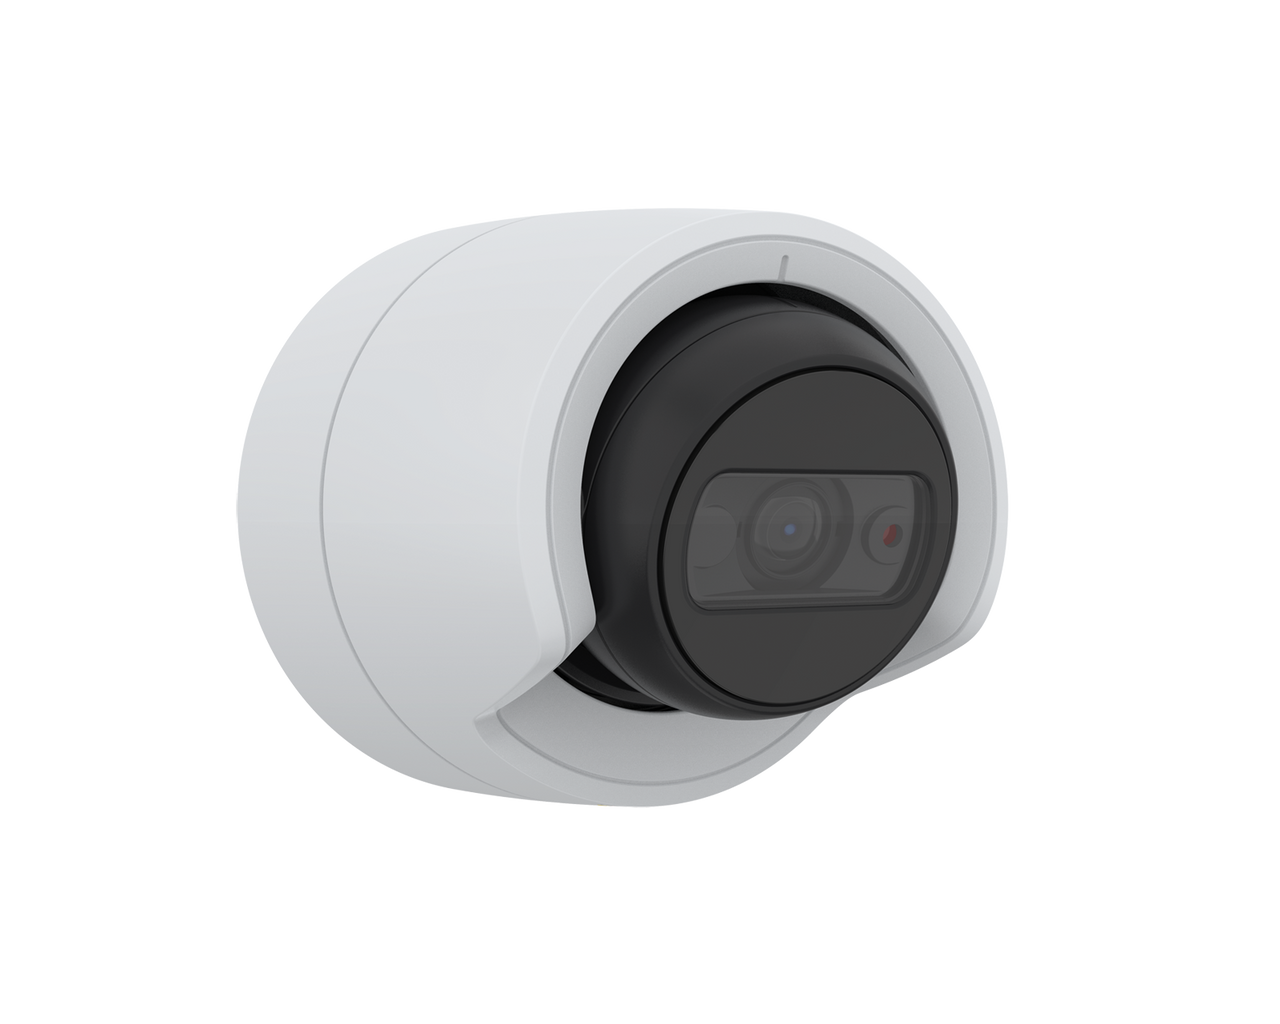 AXIS M3116-LVE Affordable flat-faced 4 MP dome with IR